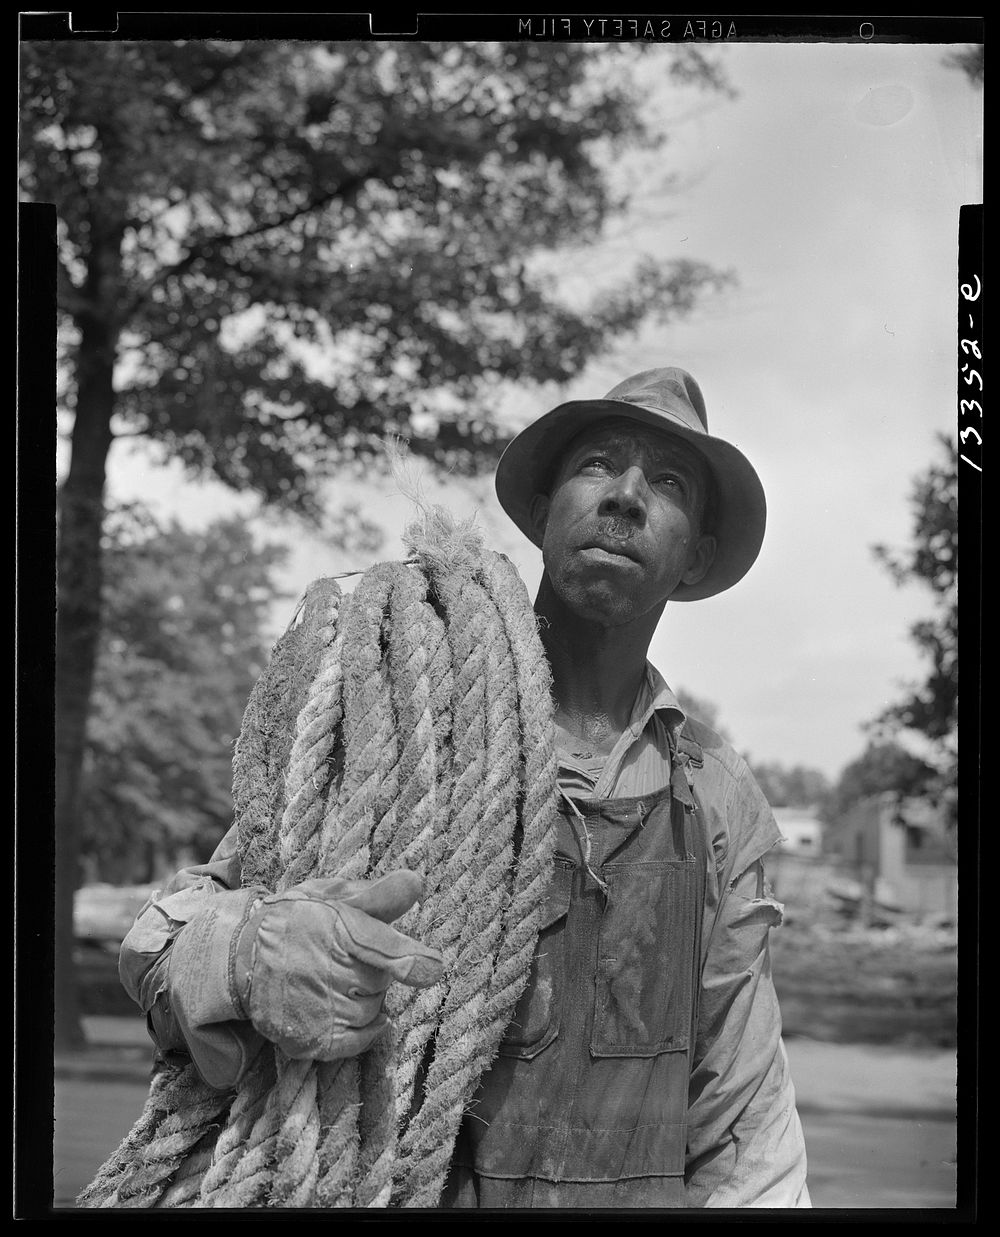 Washington, D.C. Construction workman. Sourced from the Library of Congress.